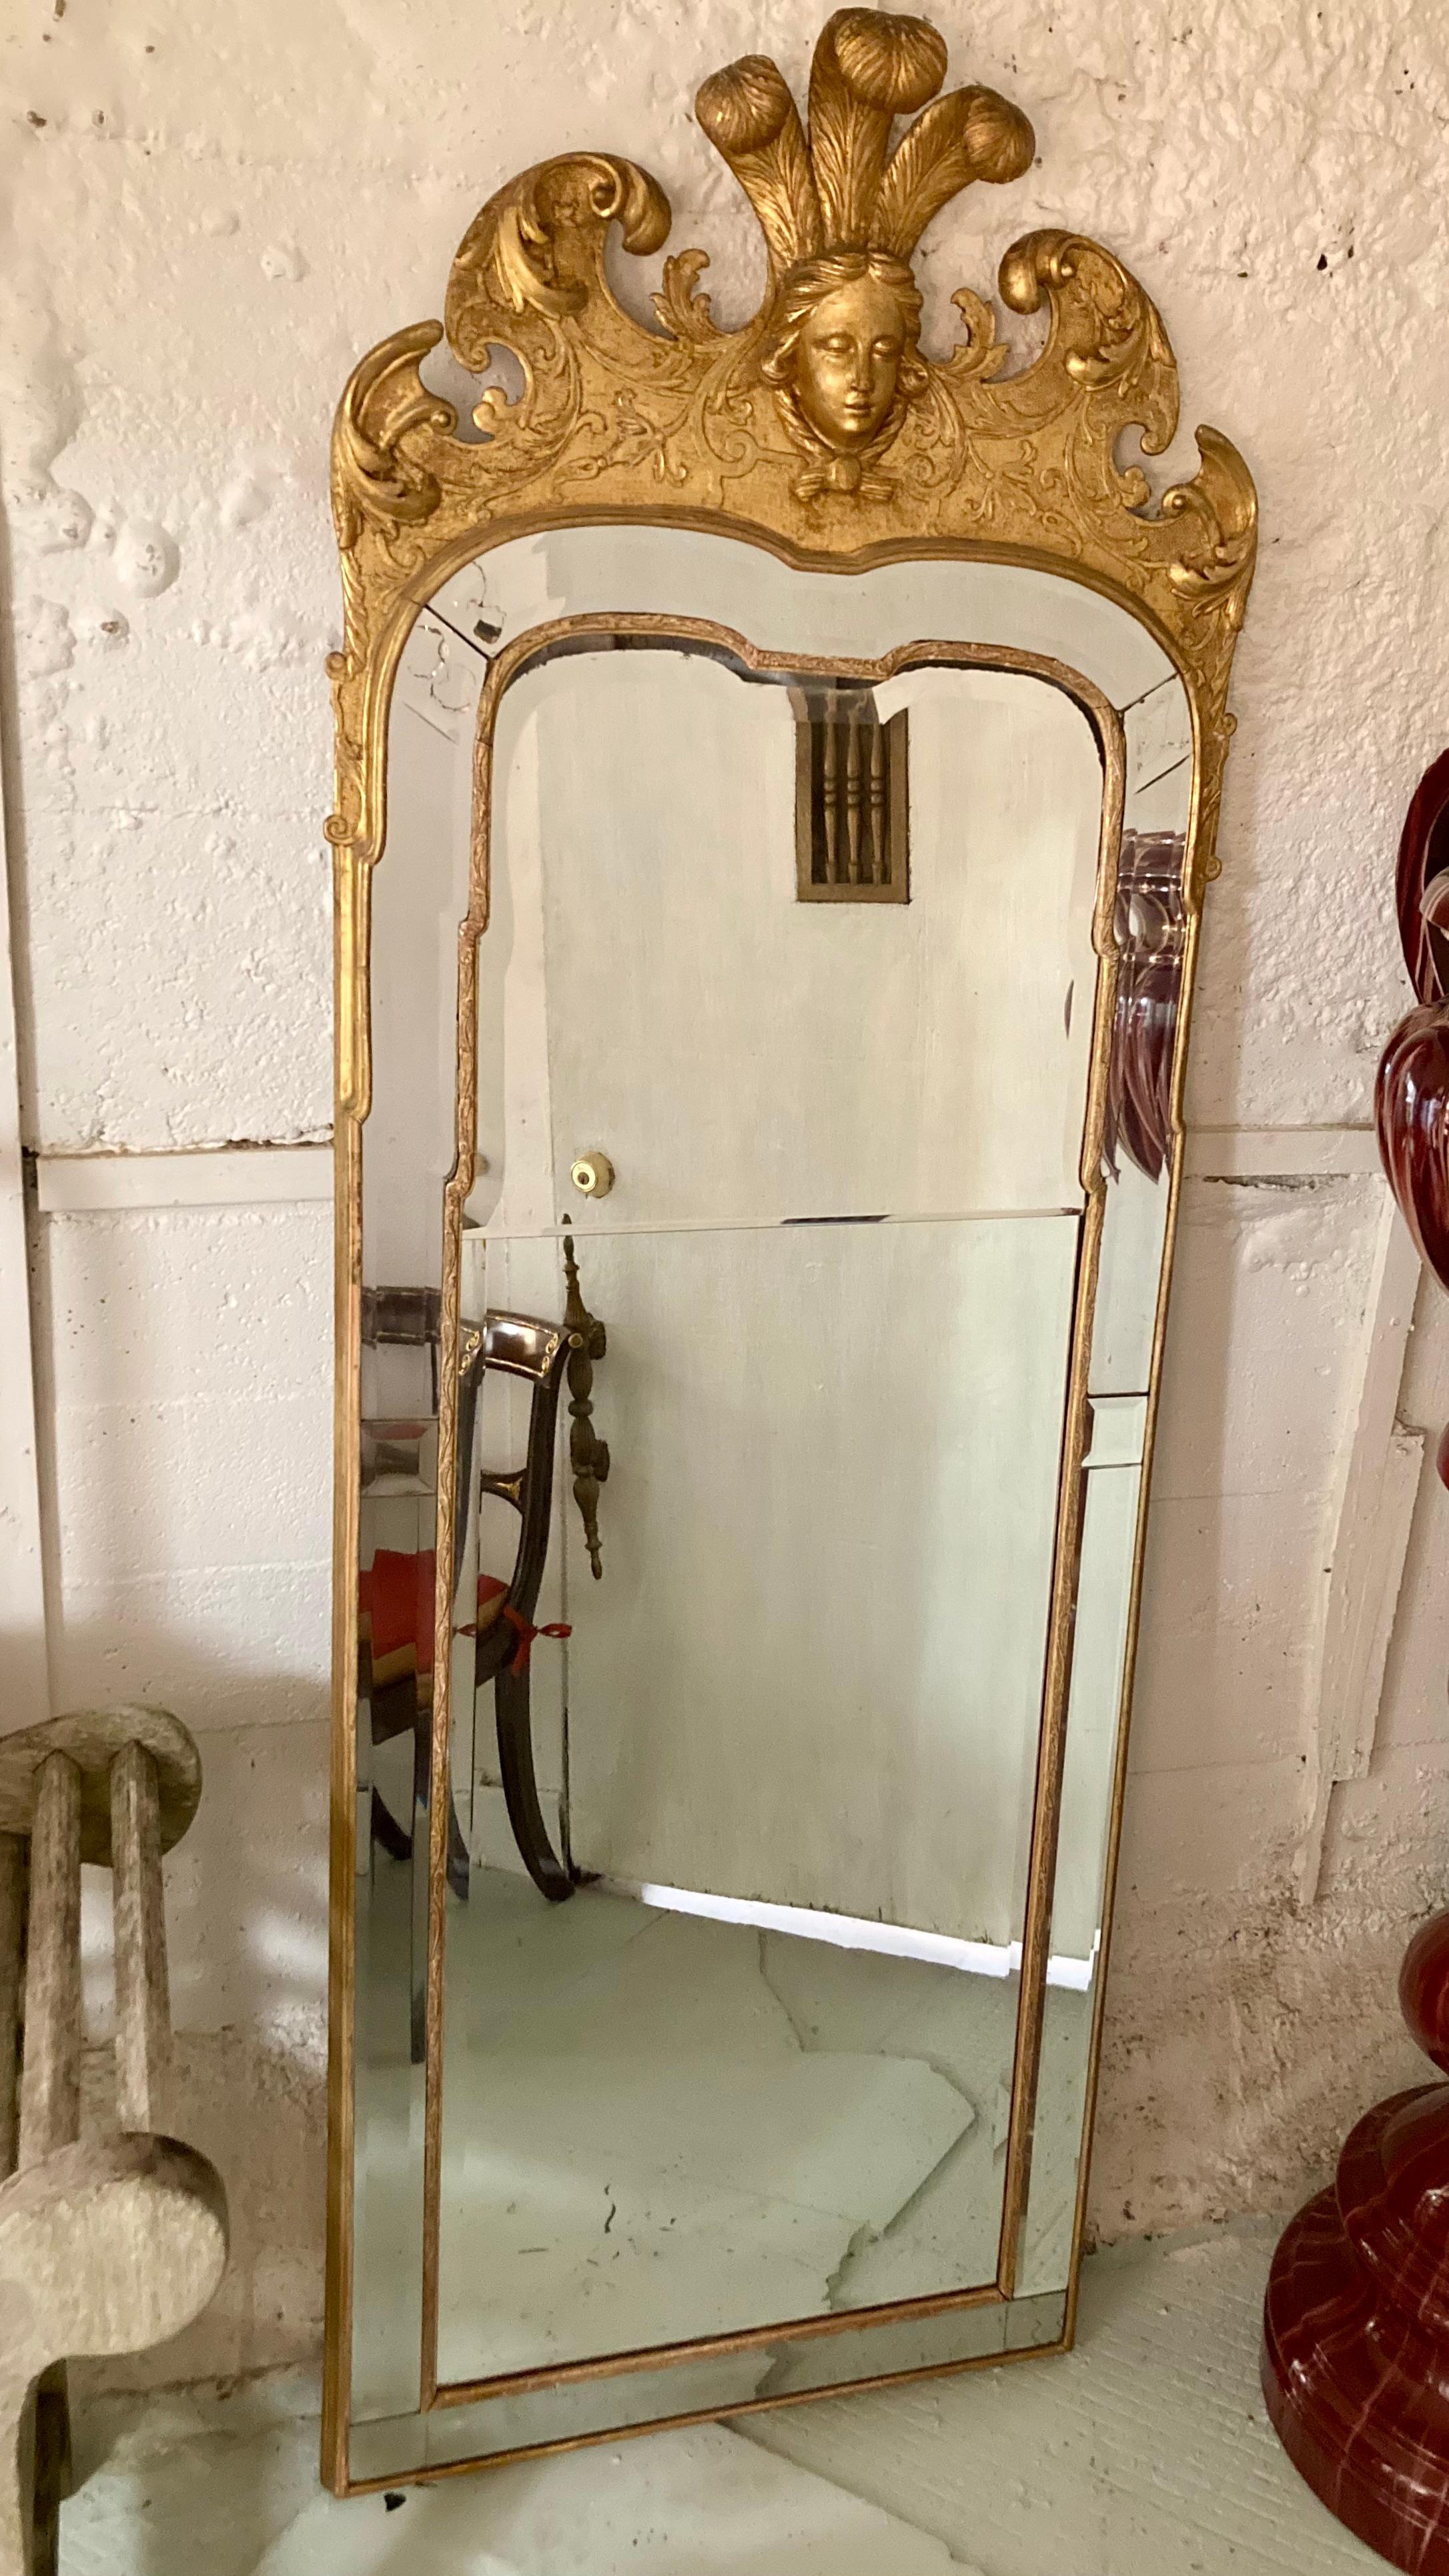 Beautiful French Napoleon III gilt floor mirror. Nice condition for the age, however the glass is loose and delicate.